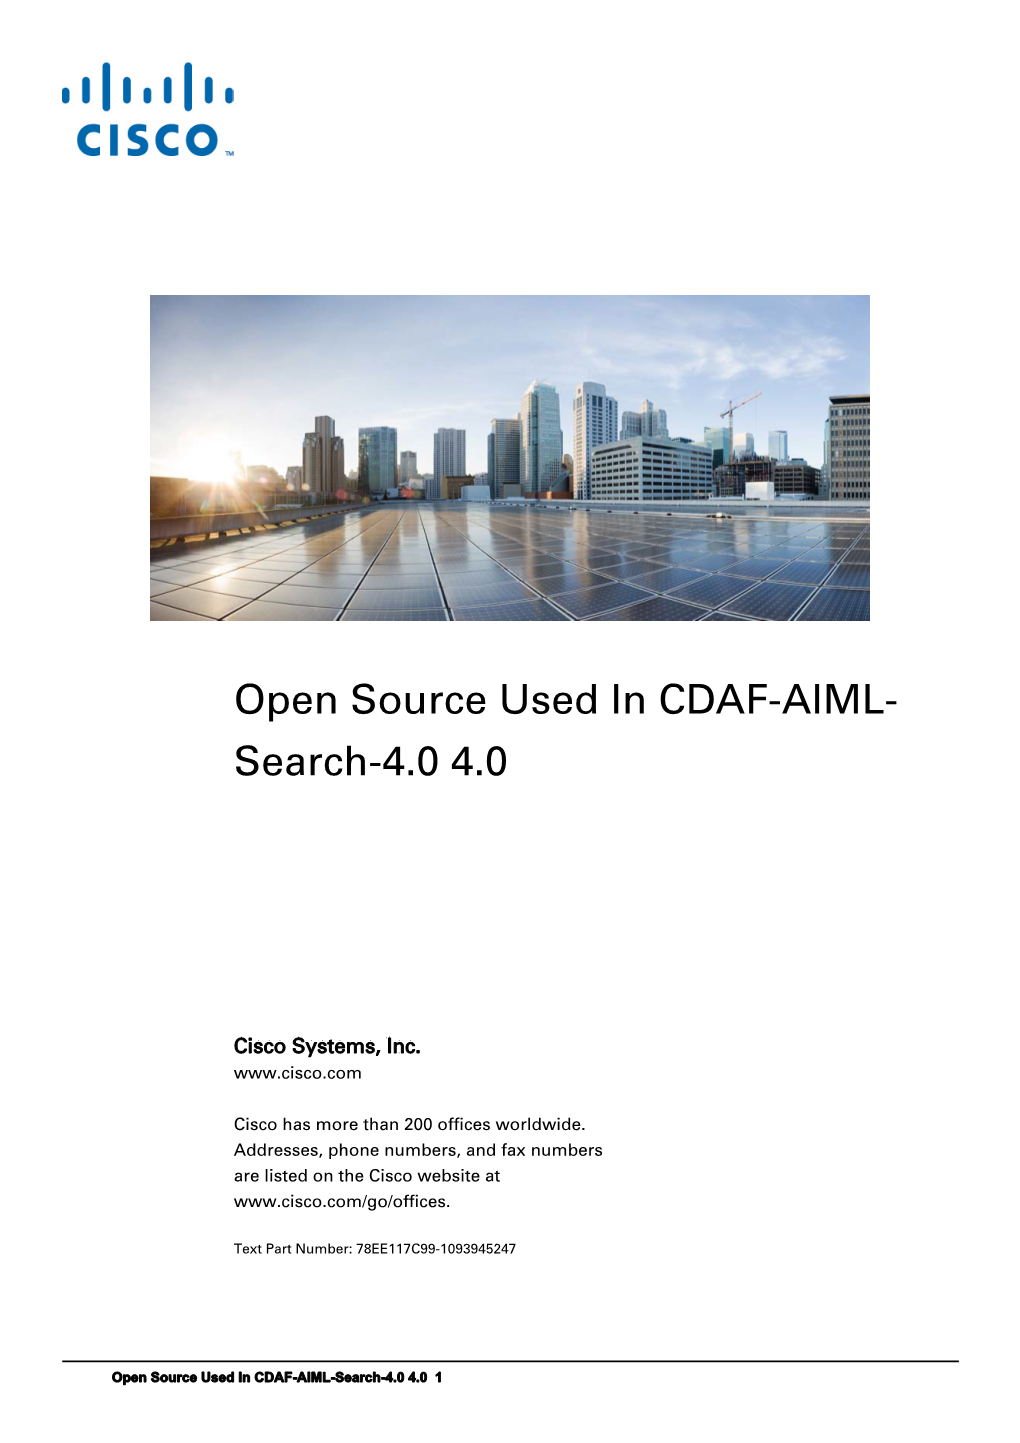 Open Source Used in CDAF-AIML-Search-4.0 4.0 1 This Document Contains Licenses and Notices for Open Source Software Used in This Product